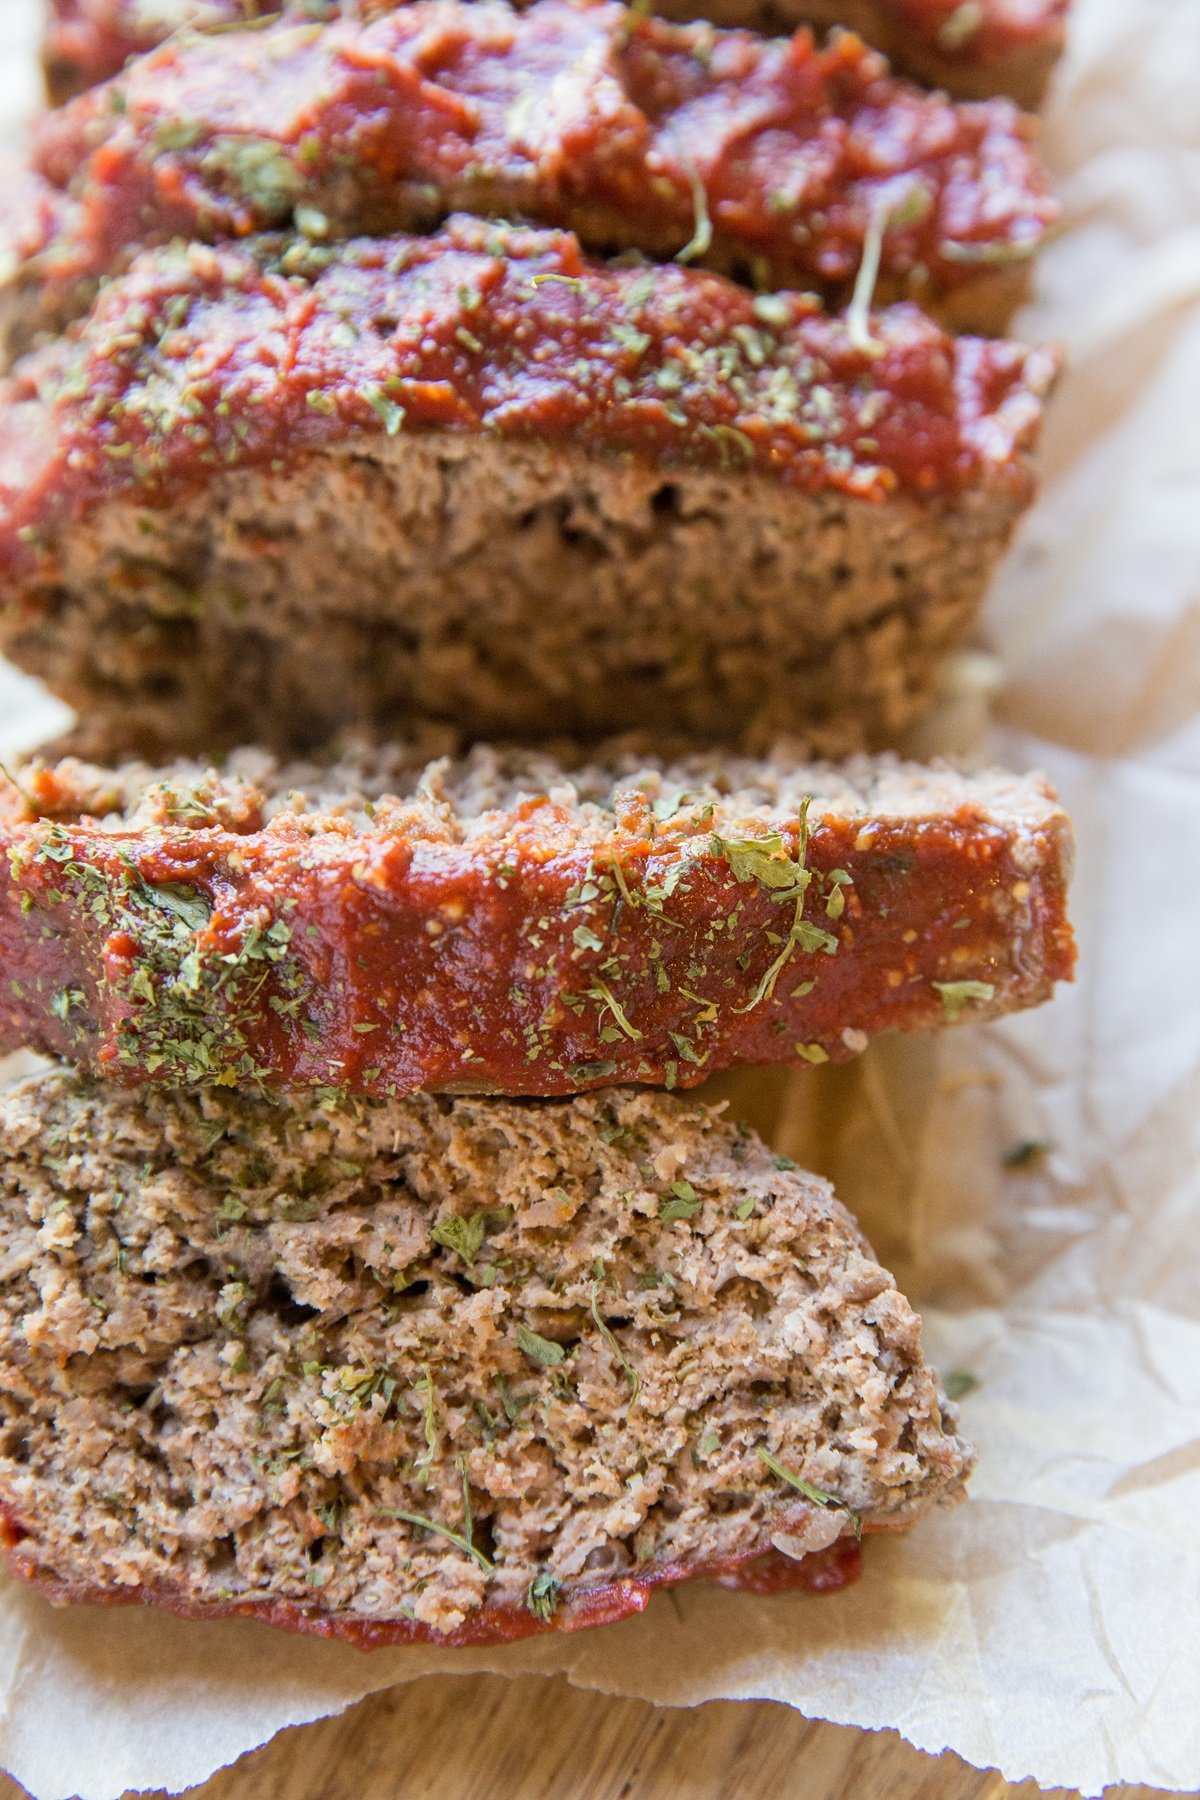 Sliced meatloaf on a sheet of parchment paper, ready to serve.